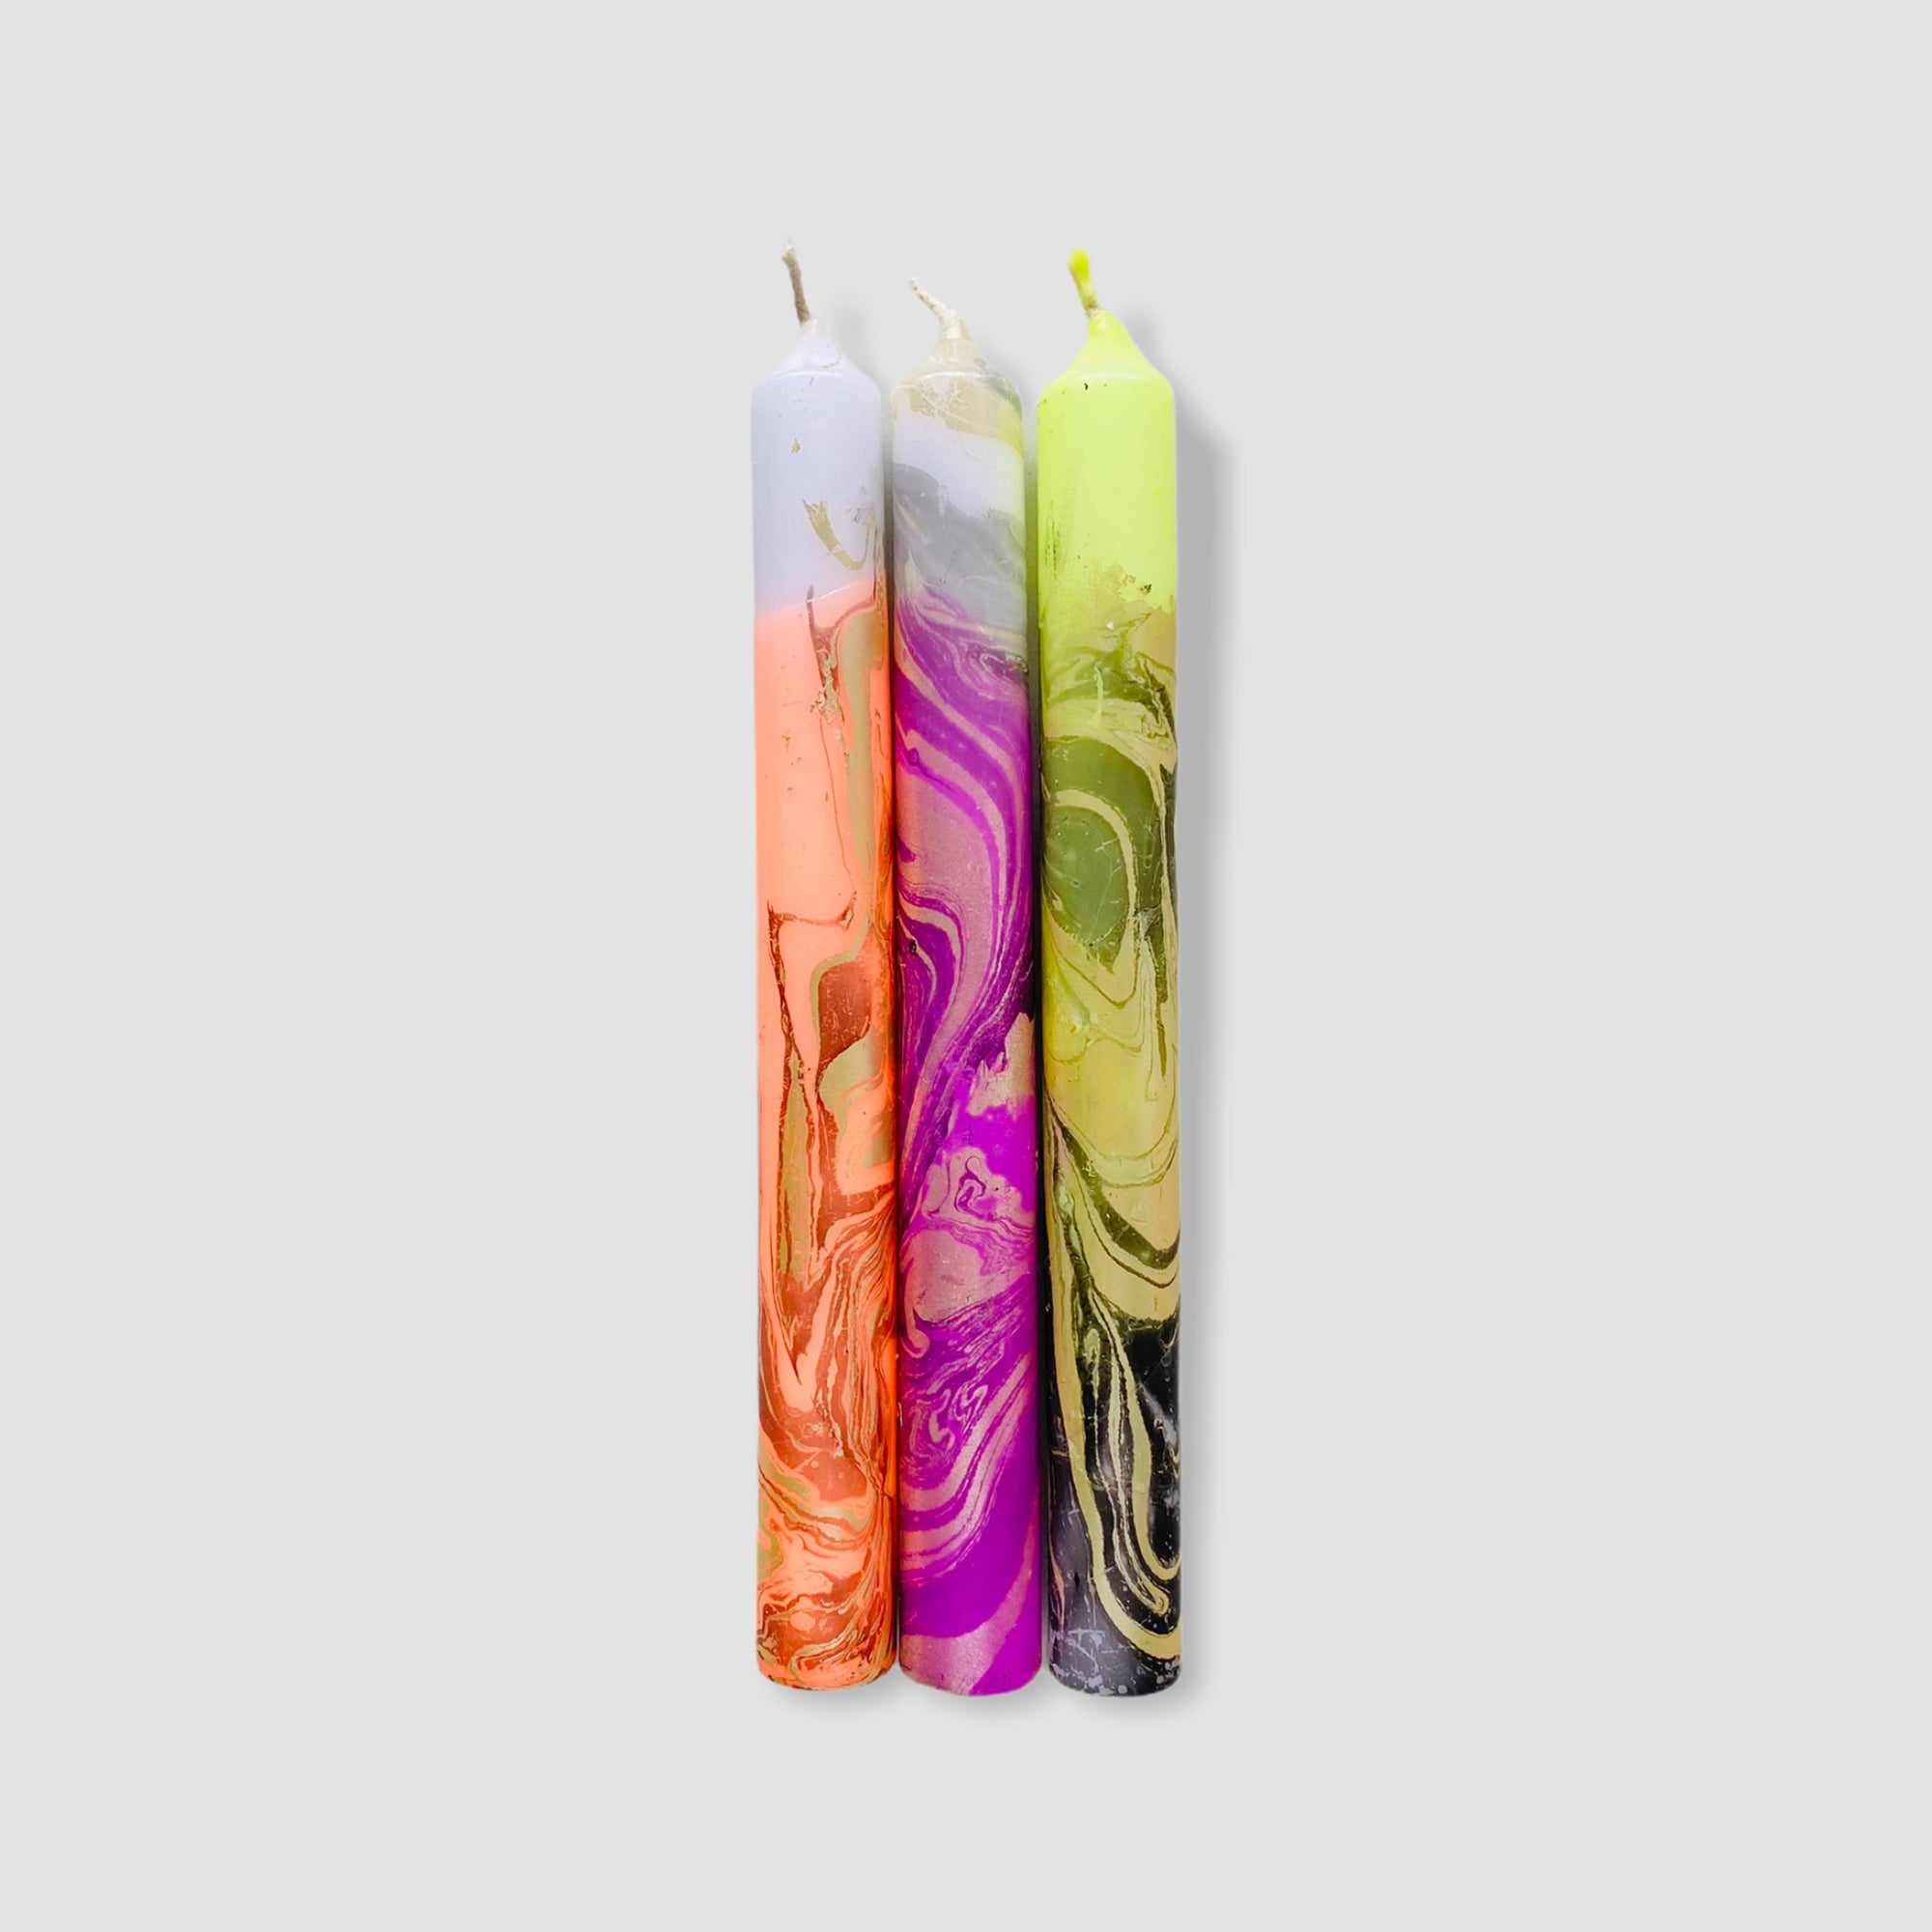 Mercury - set of 3 marbled neon candles